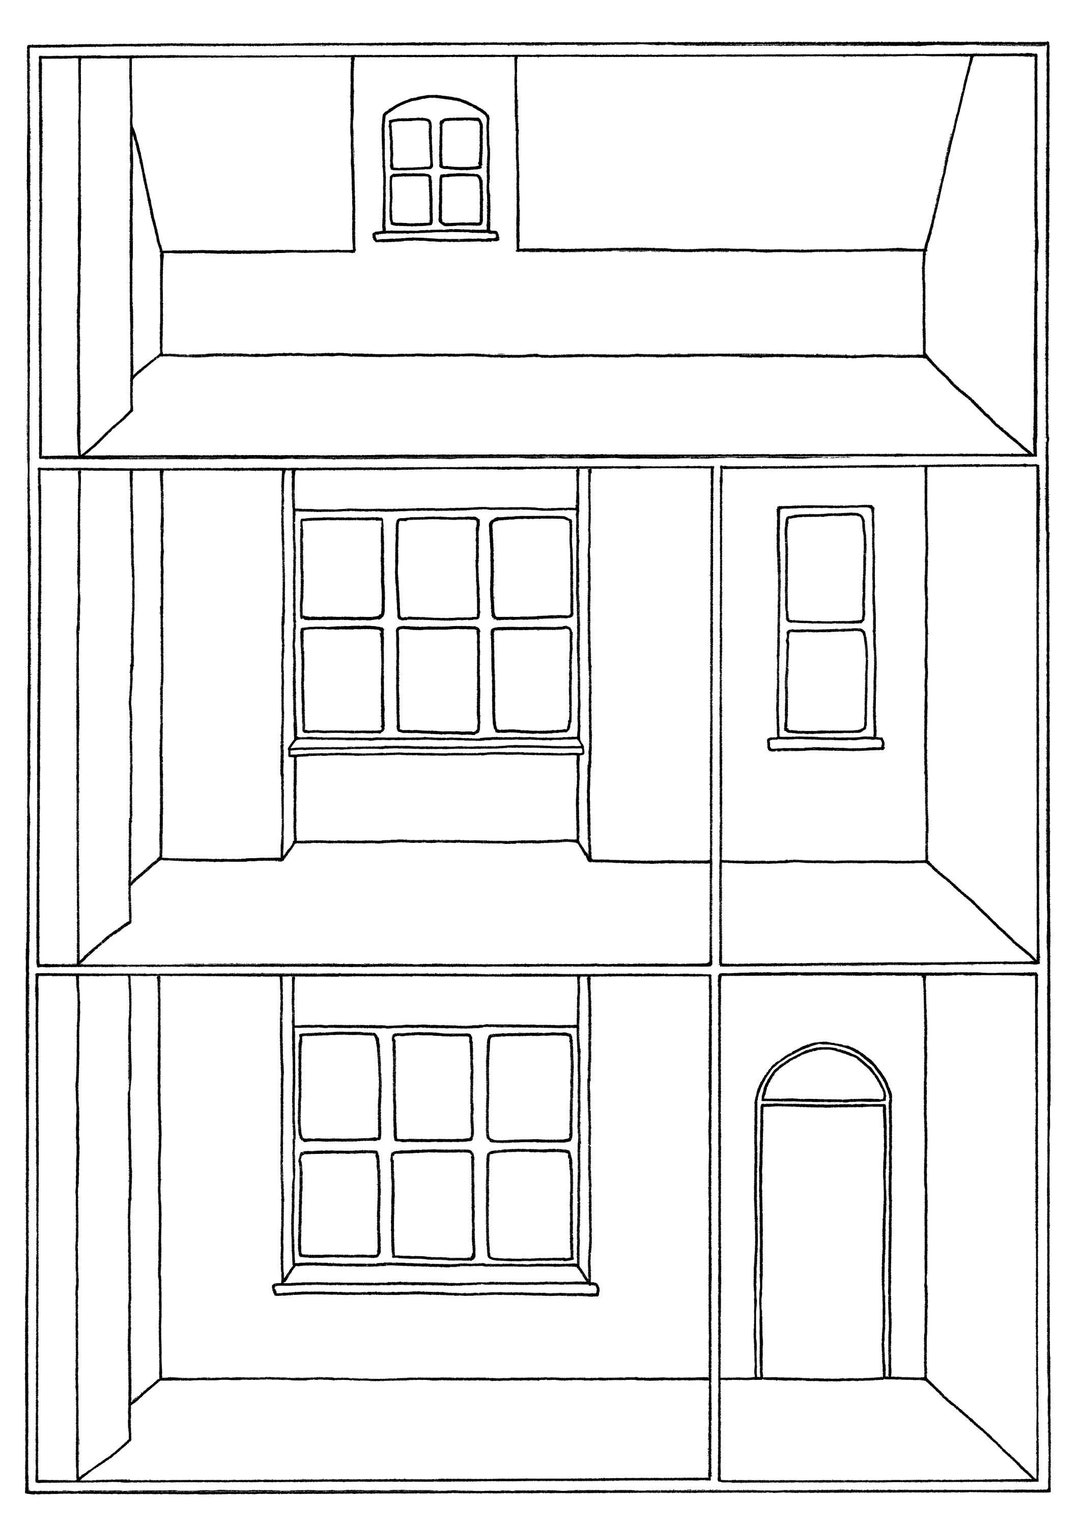 40+]Easy Doll House Drawings and Sketches